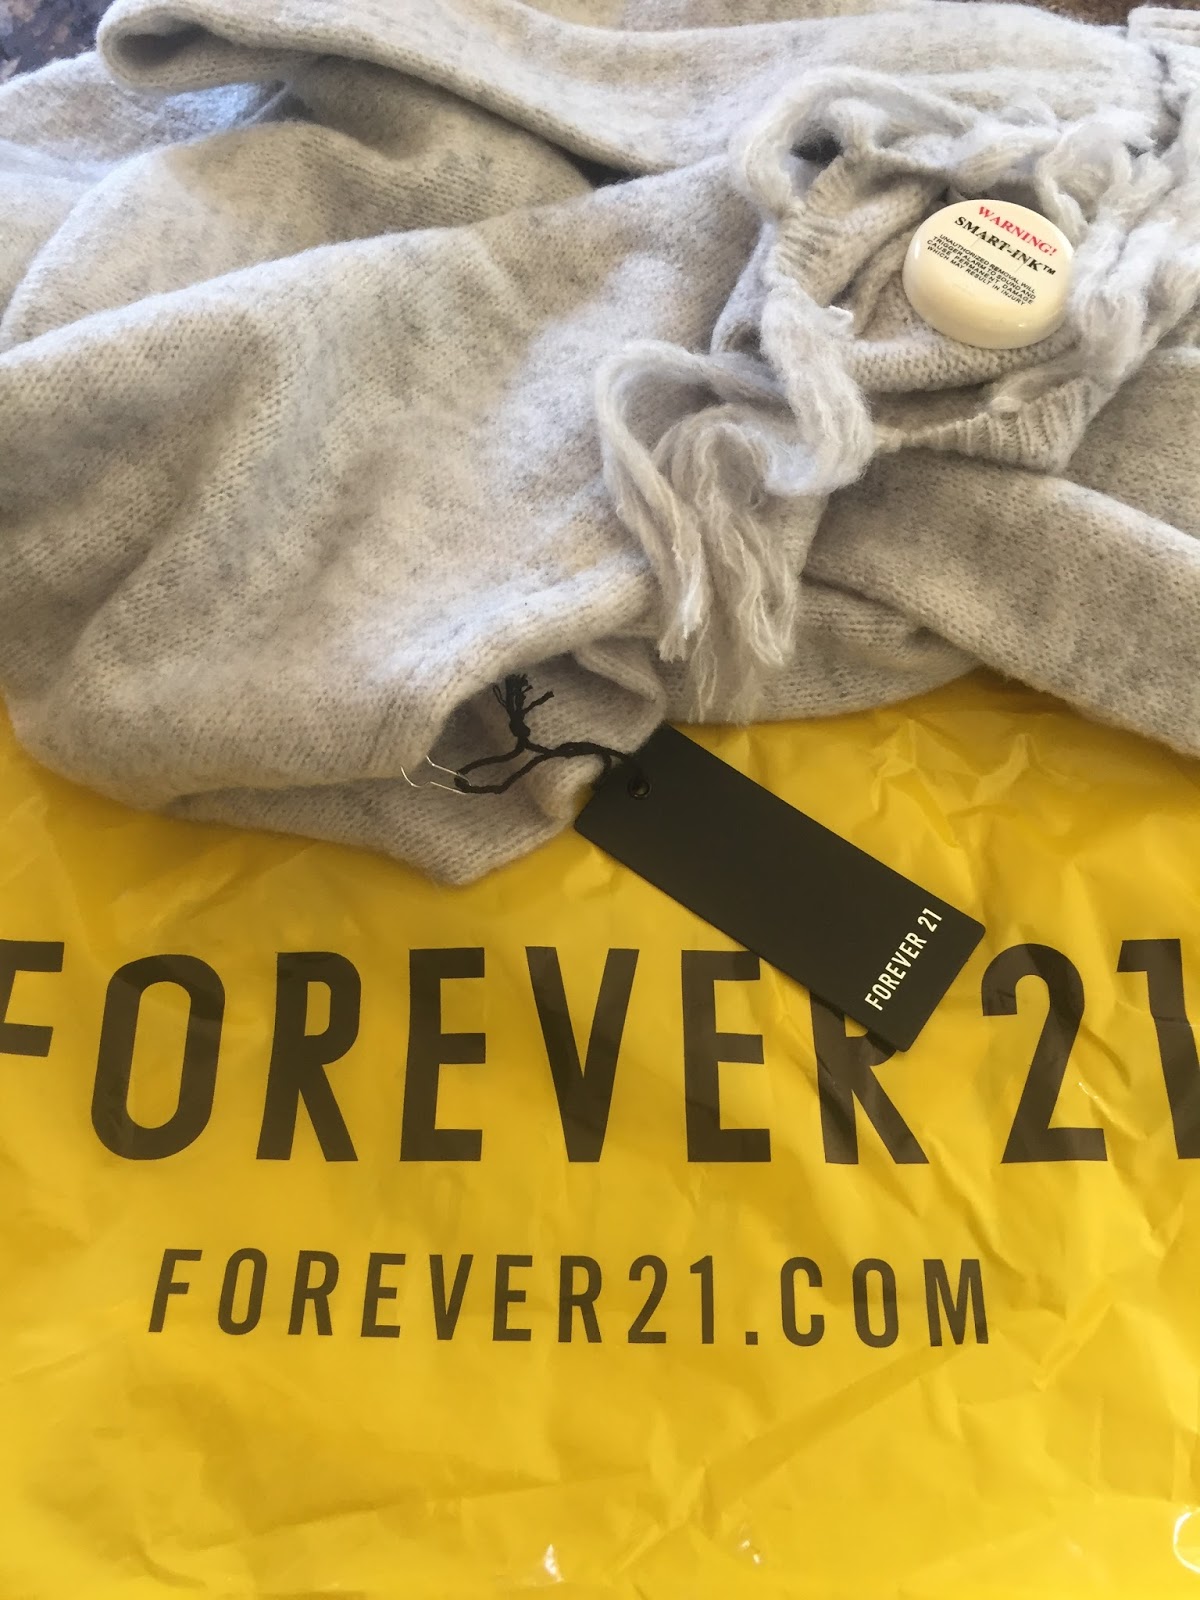 Living on Cloud Nine: WHY I WILL NO LONGER SHOP AT FOREVER 21